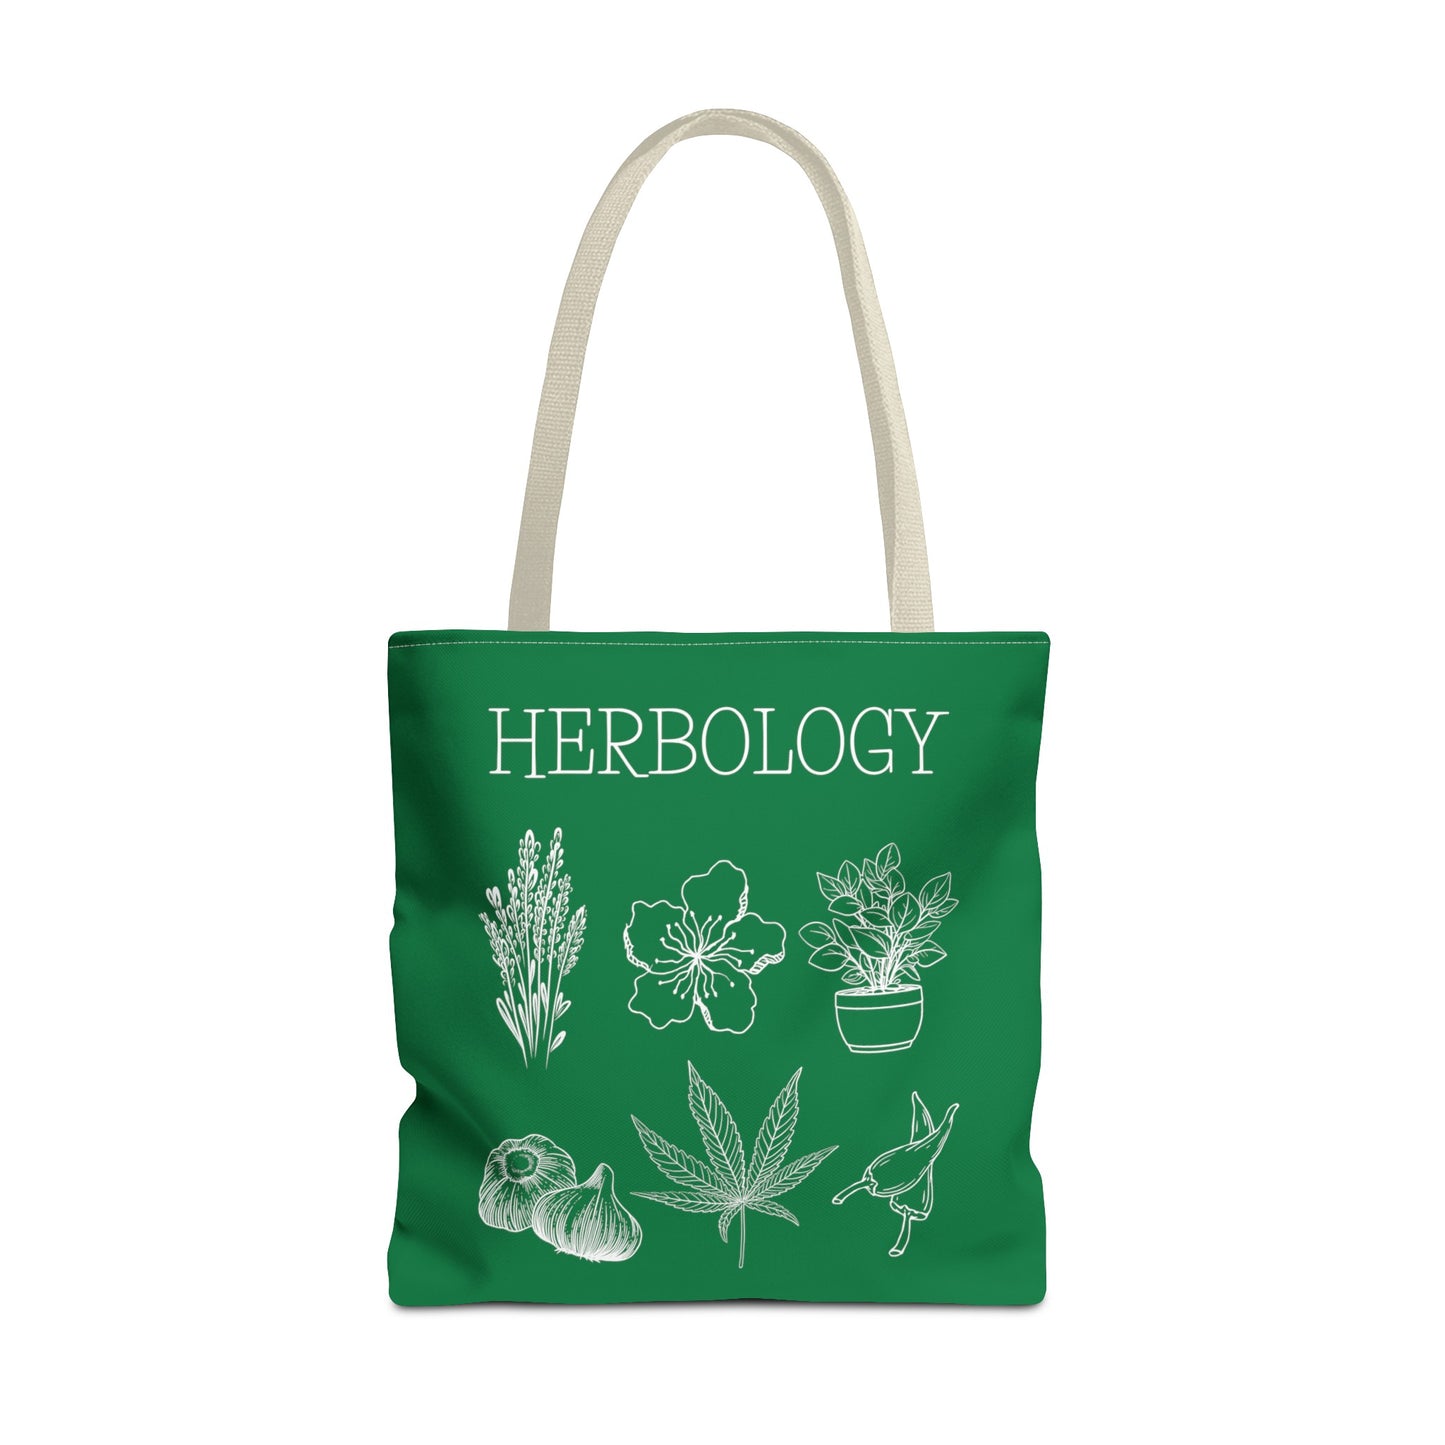 Embrace your inner witch or wizard with our whimsical Herbology carryall bag. Color is green with a beige handle.